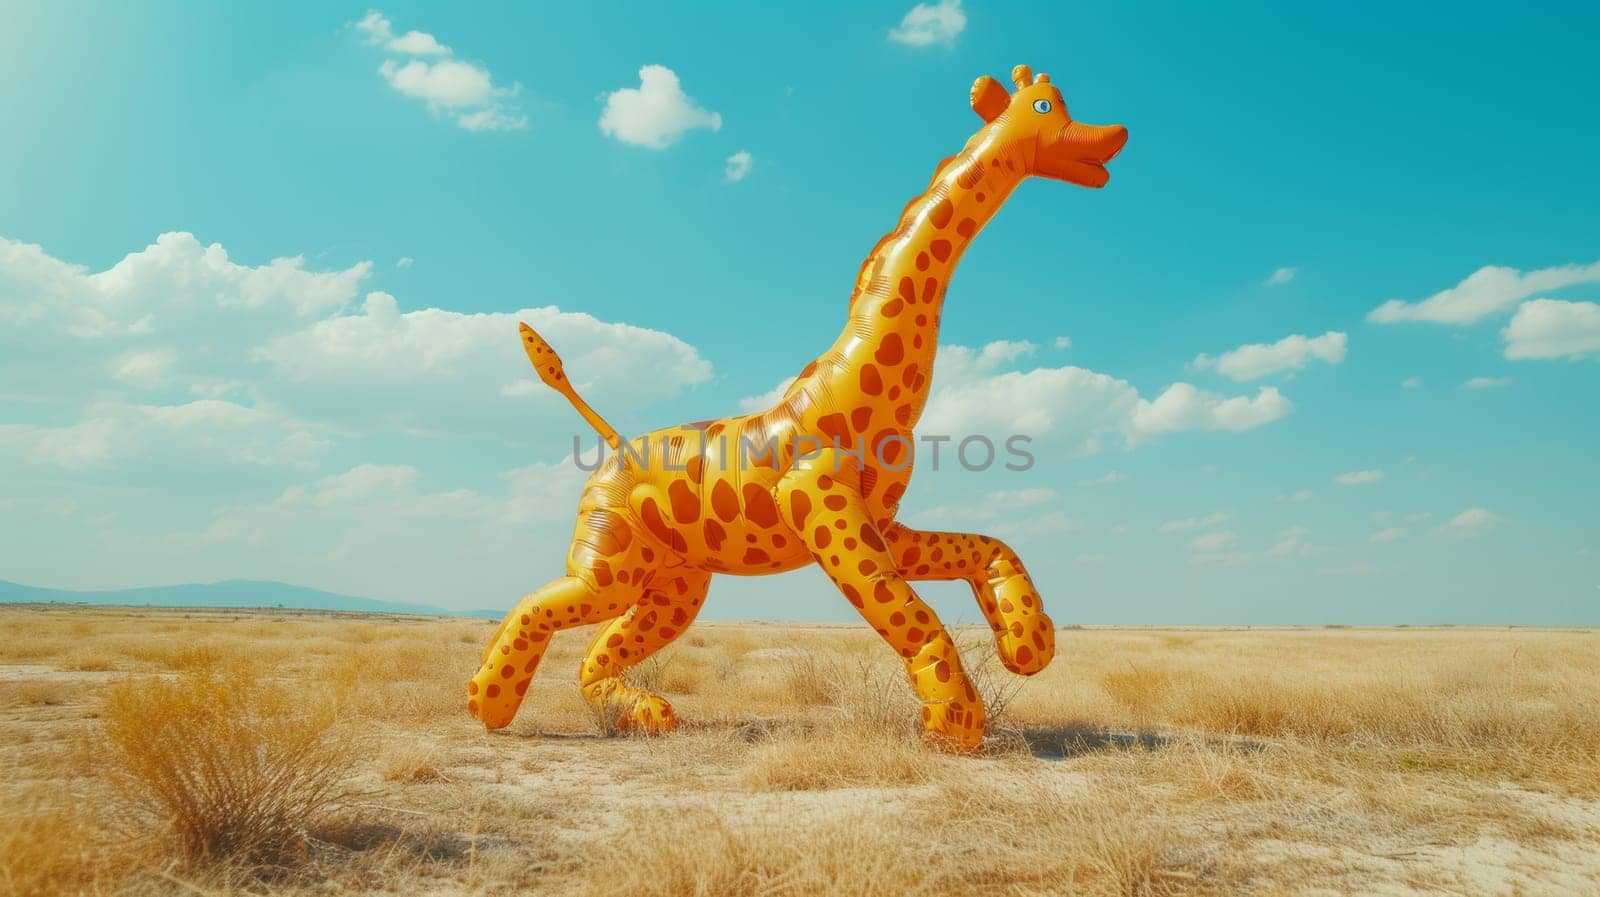 A large inflatable giraffe running through a dry grassy field, AI by starush